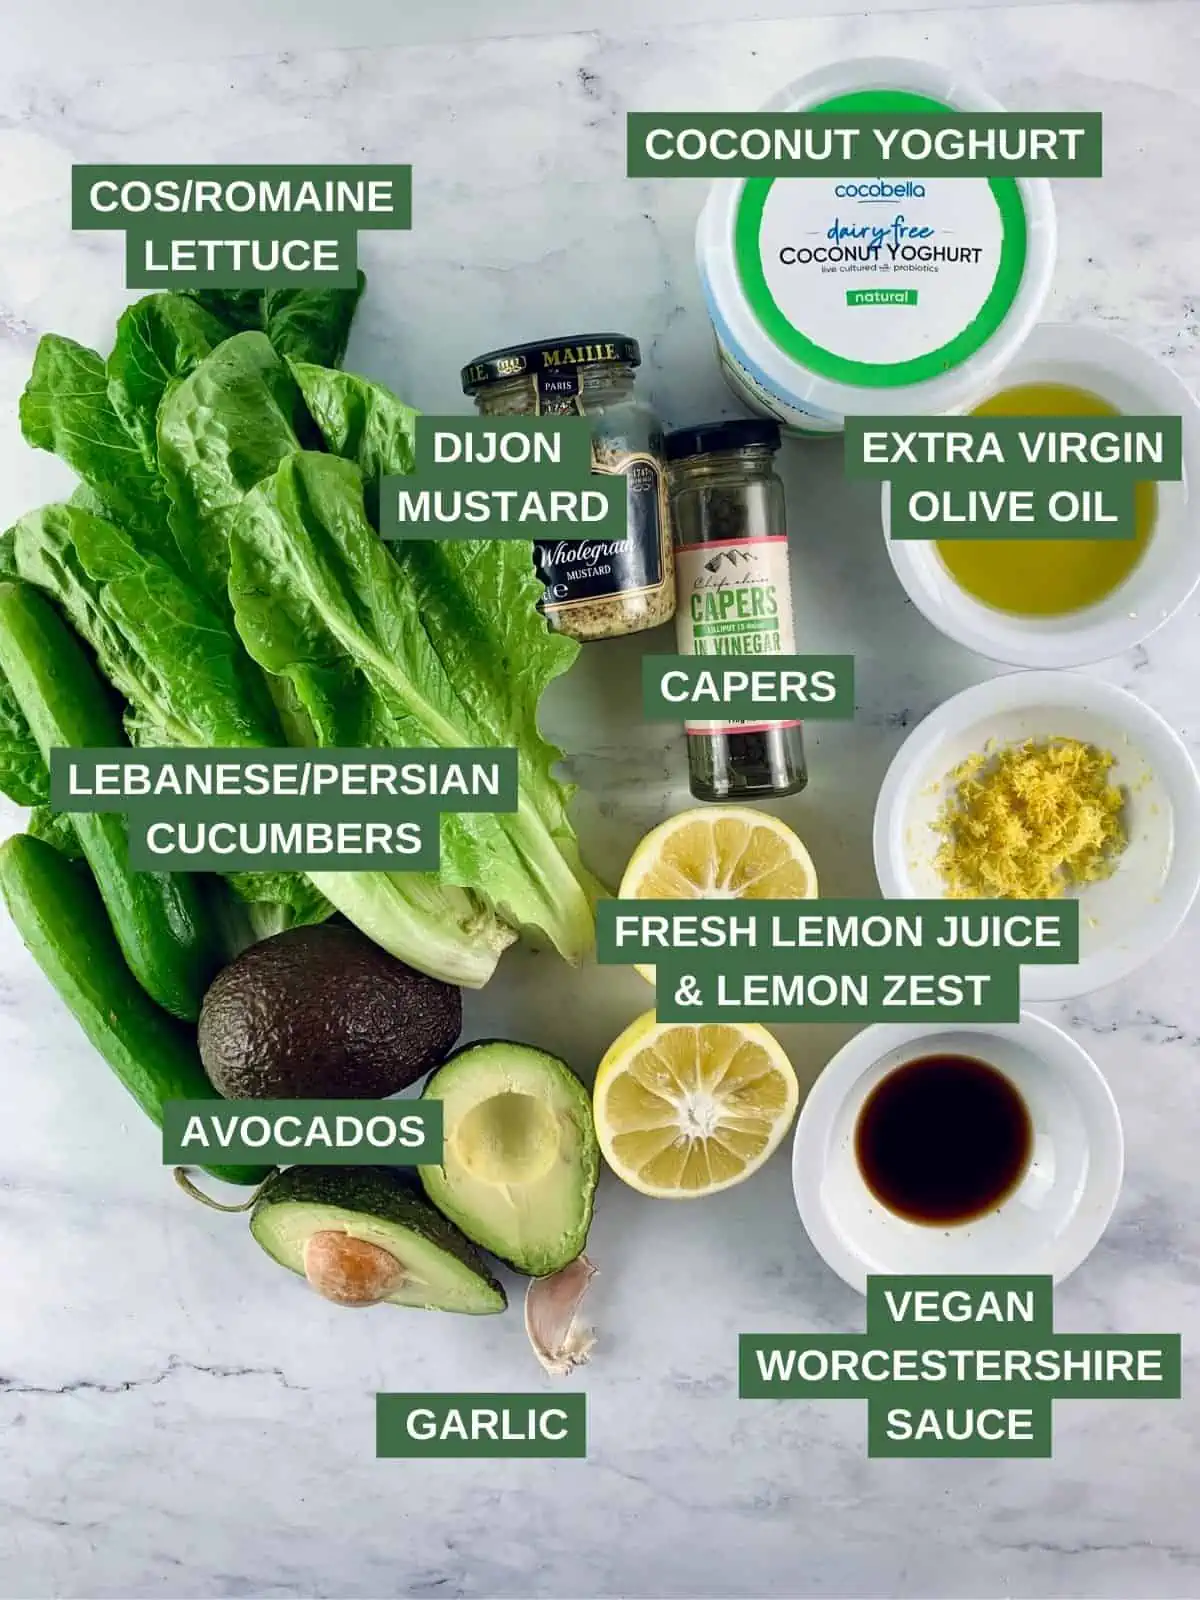 Labelled ingredients needed to make a Romain Avocado salad.